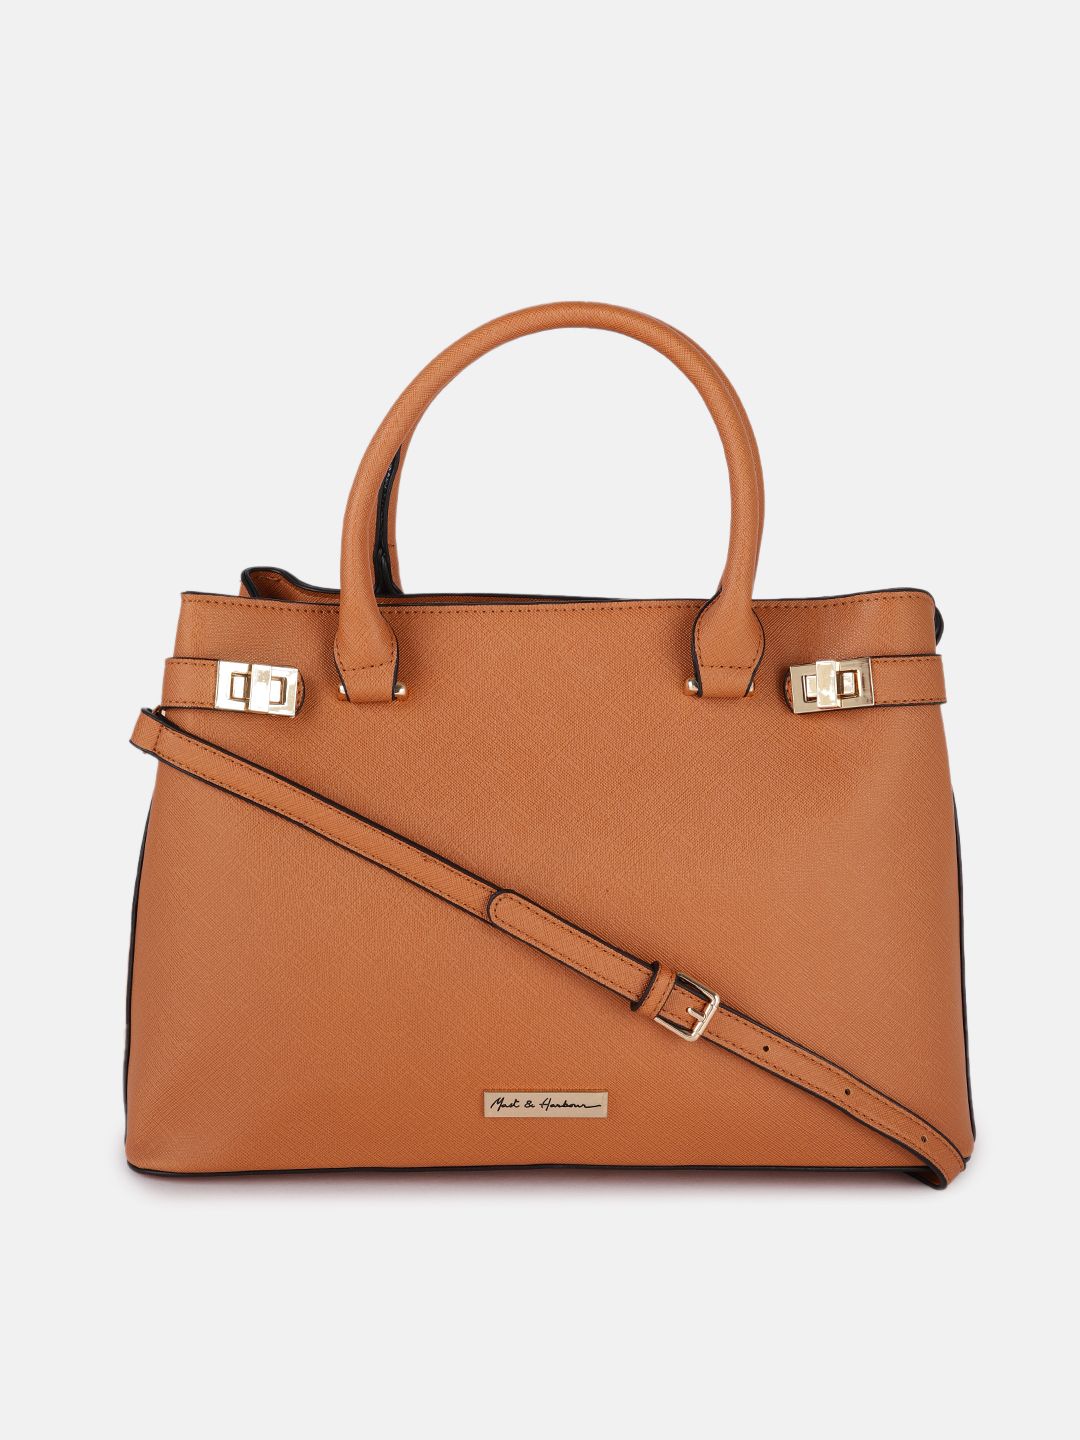 Mast & Harbour Tan Solid PU Regular Structured Handheld Bag with Buckle Detail Price in India